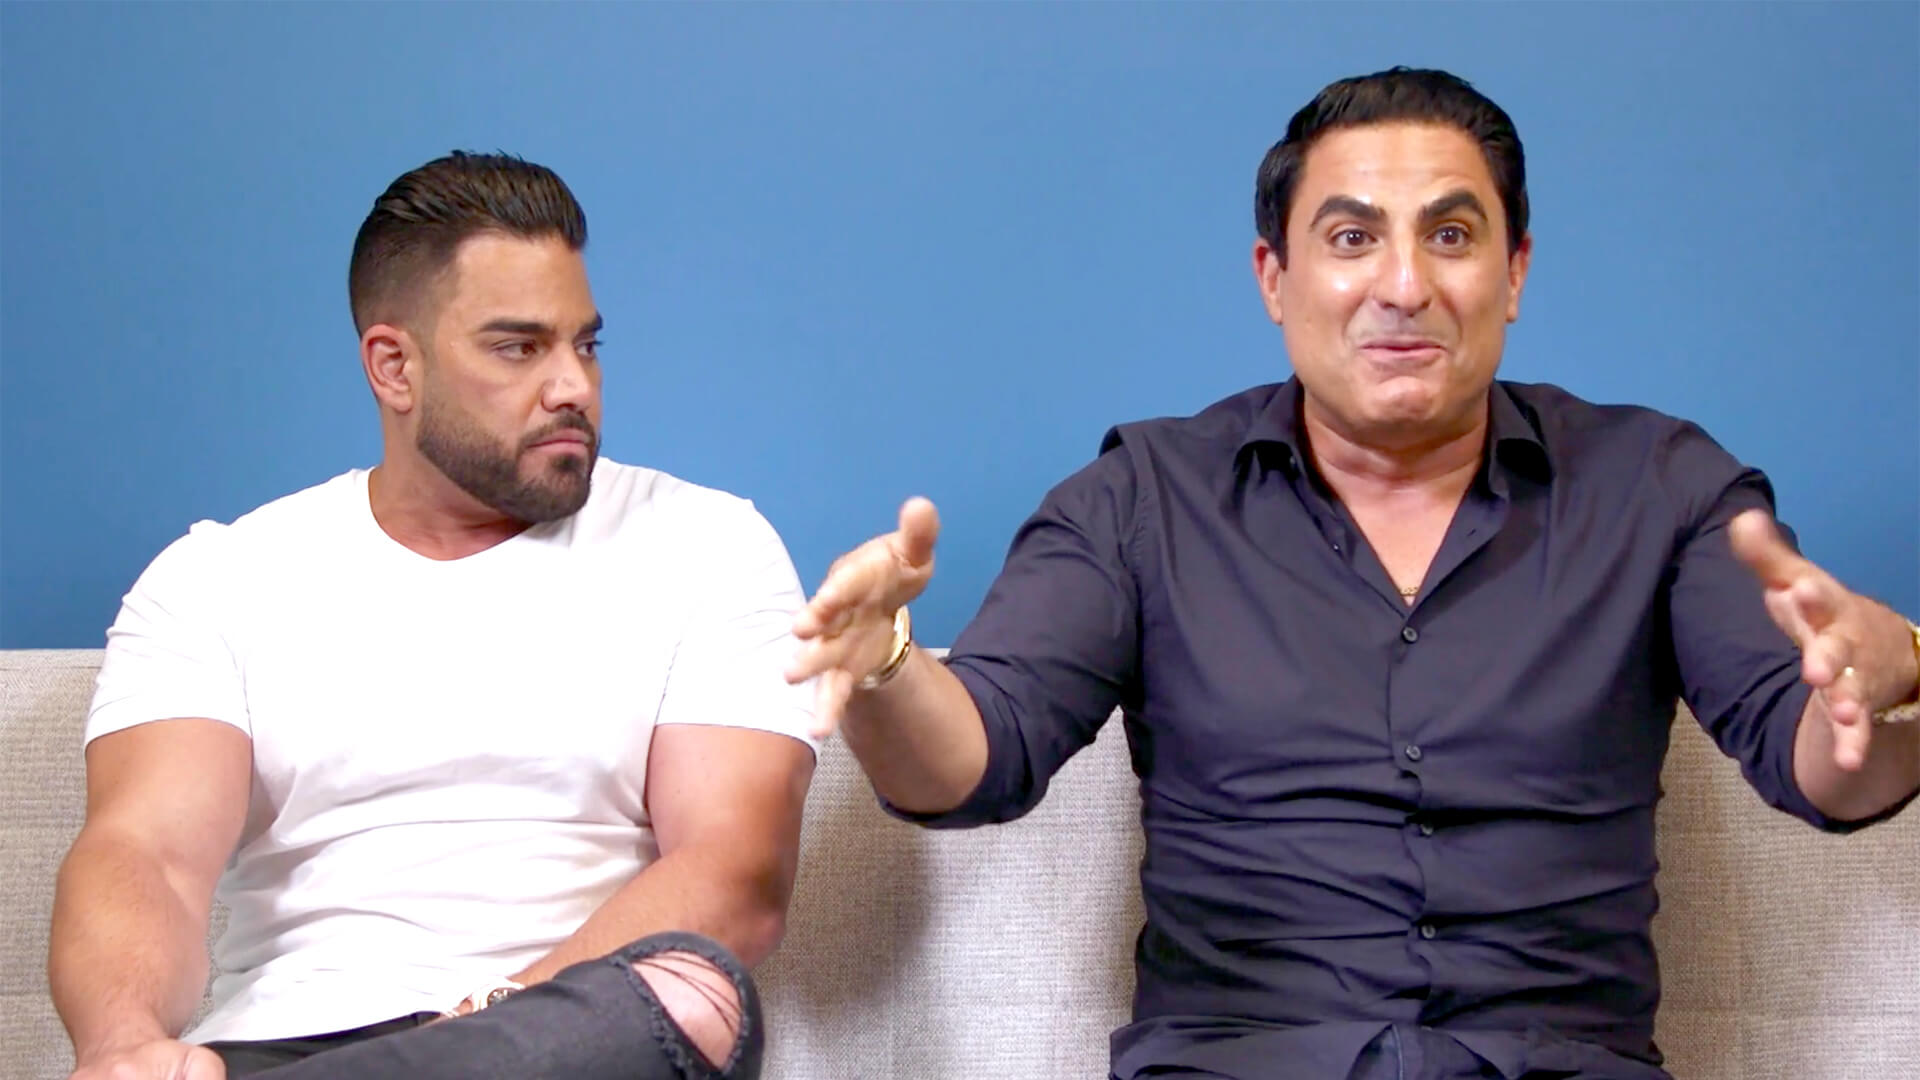 EXCLUSIVE: ‘Shahs of Sunset’ Reza Farahan & Mike Shouhed’s EPIC Fight At BravoCon EXPOSED —  Mike Called Reza ‘Fat Queen’